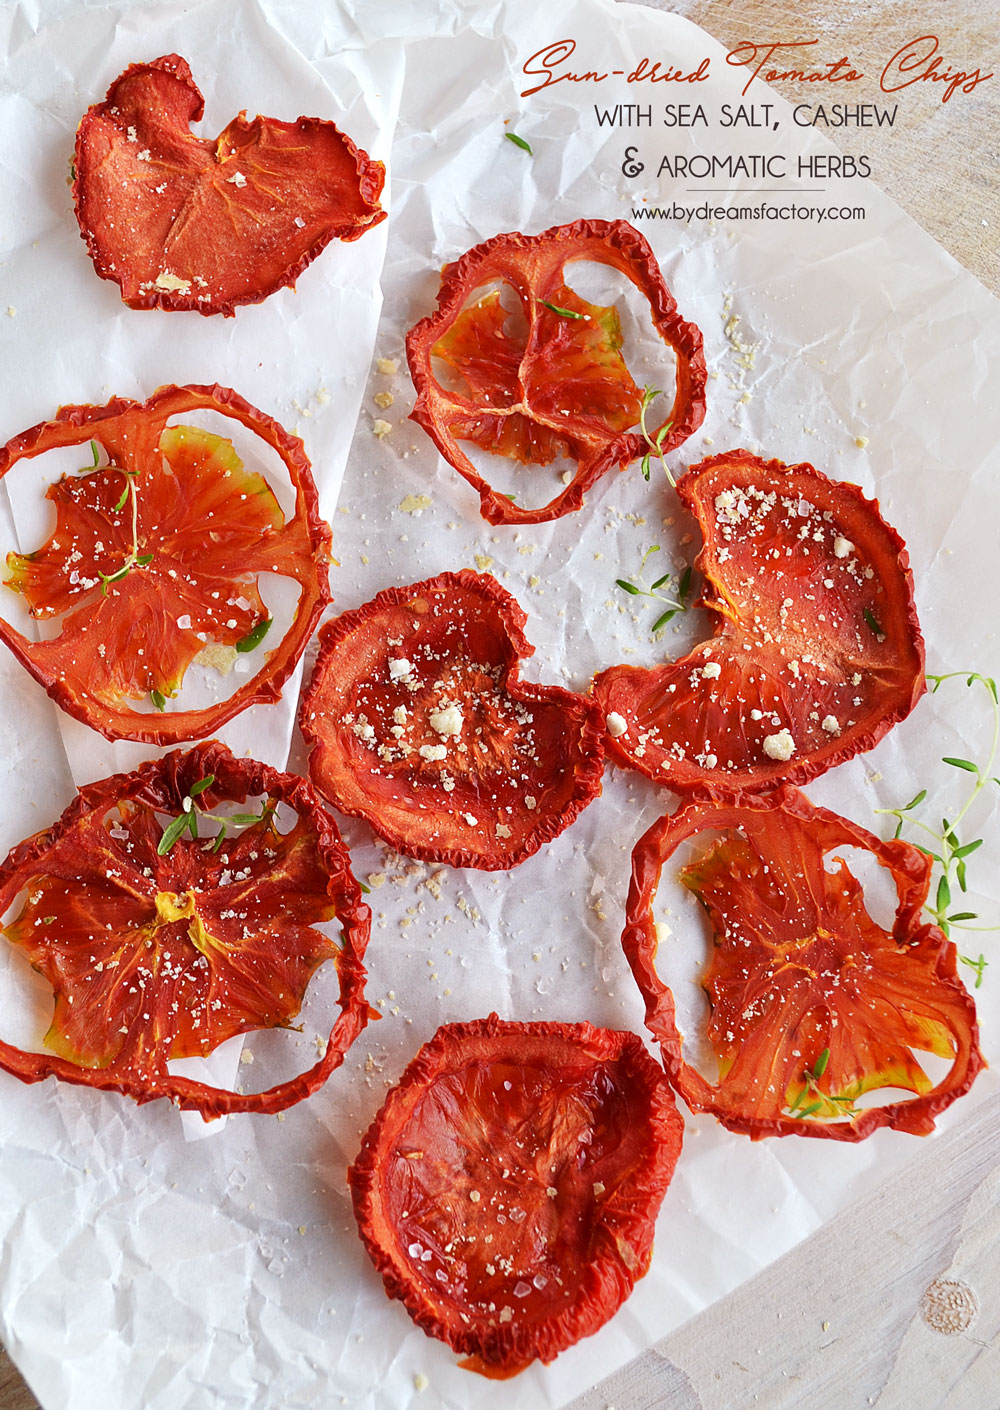 sun-dried-tomatoes-chips-with-sea-salt-cashews-and-herbs-2-ok